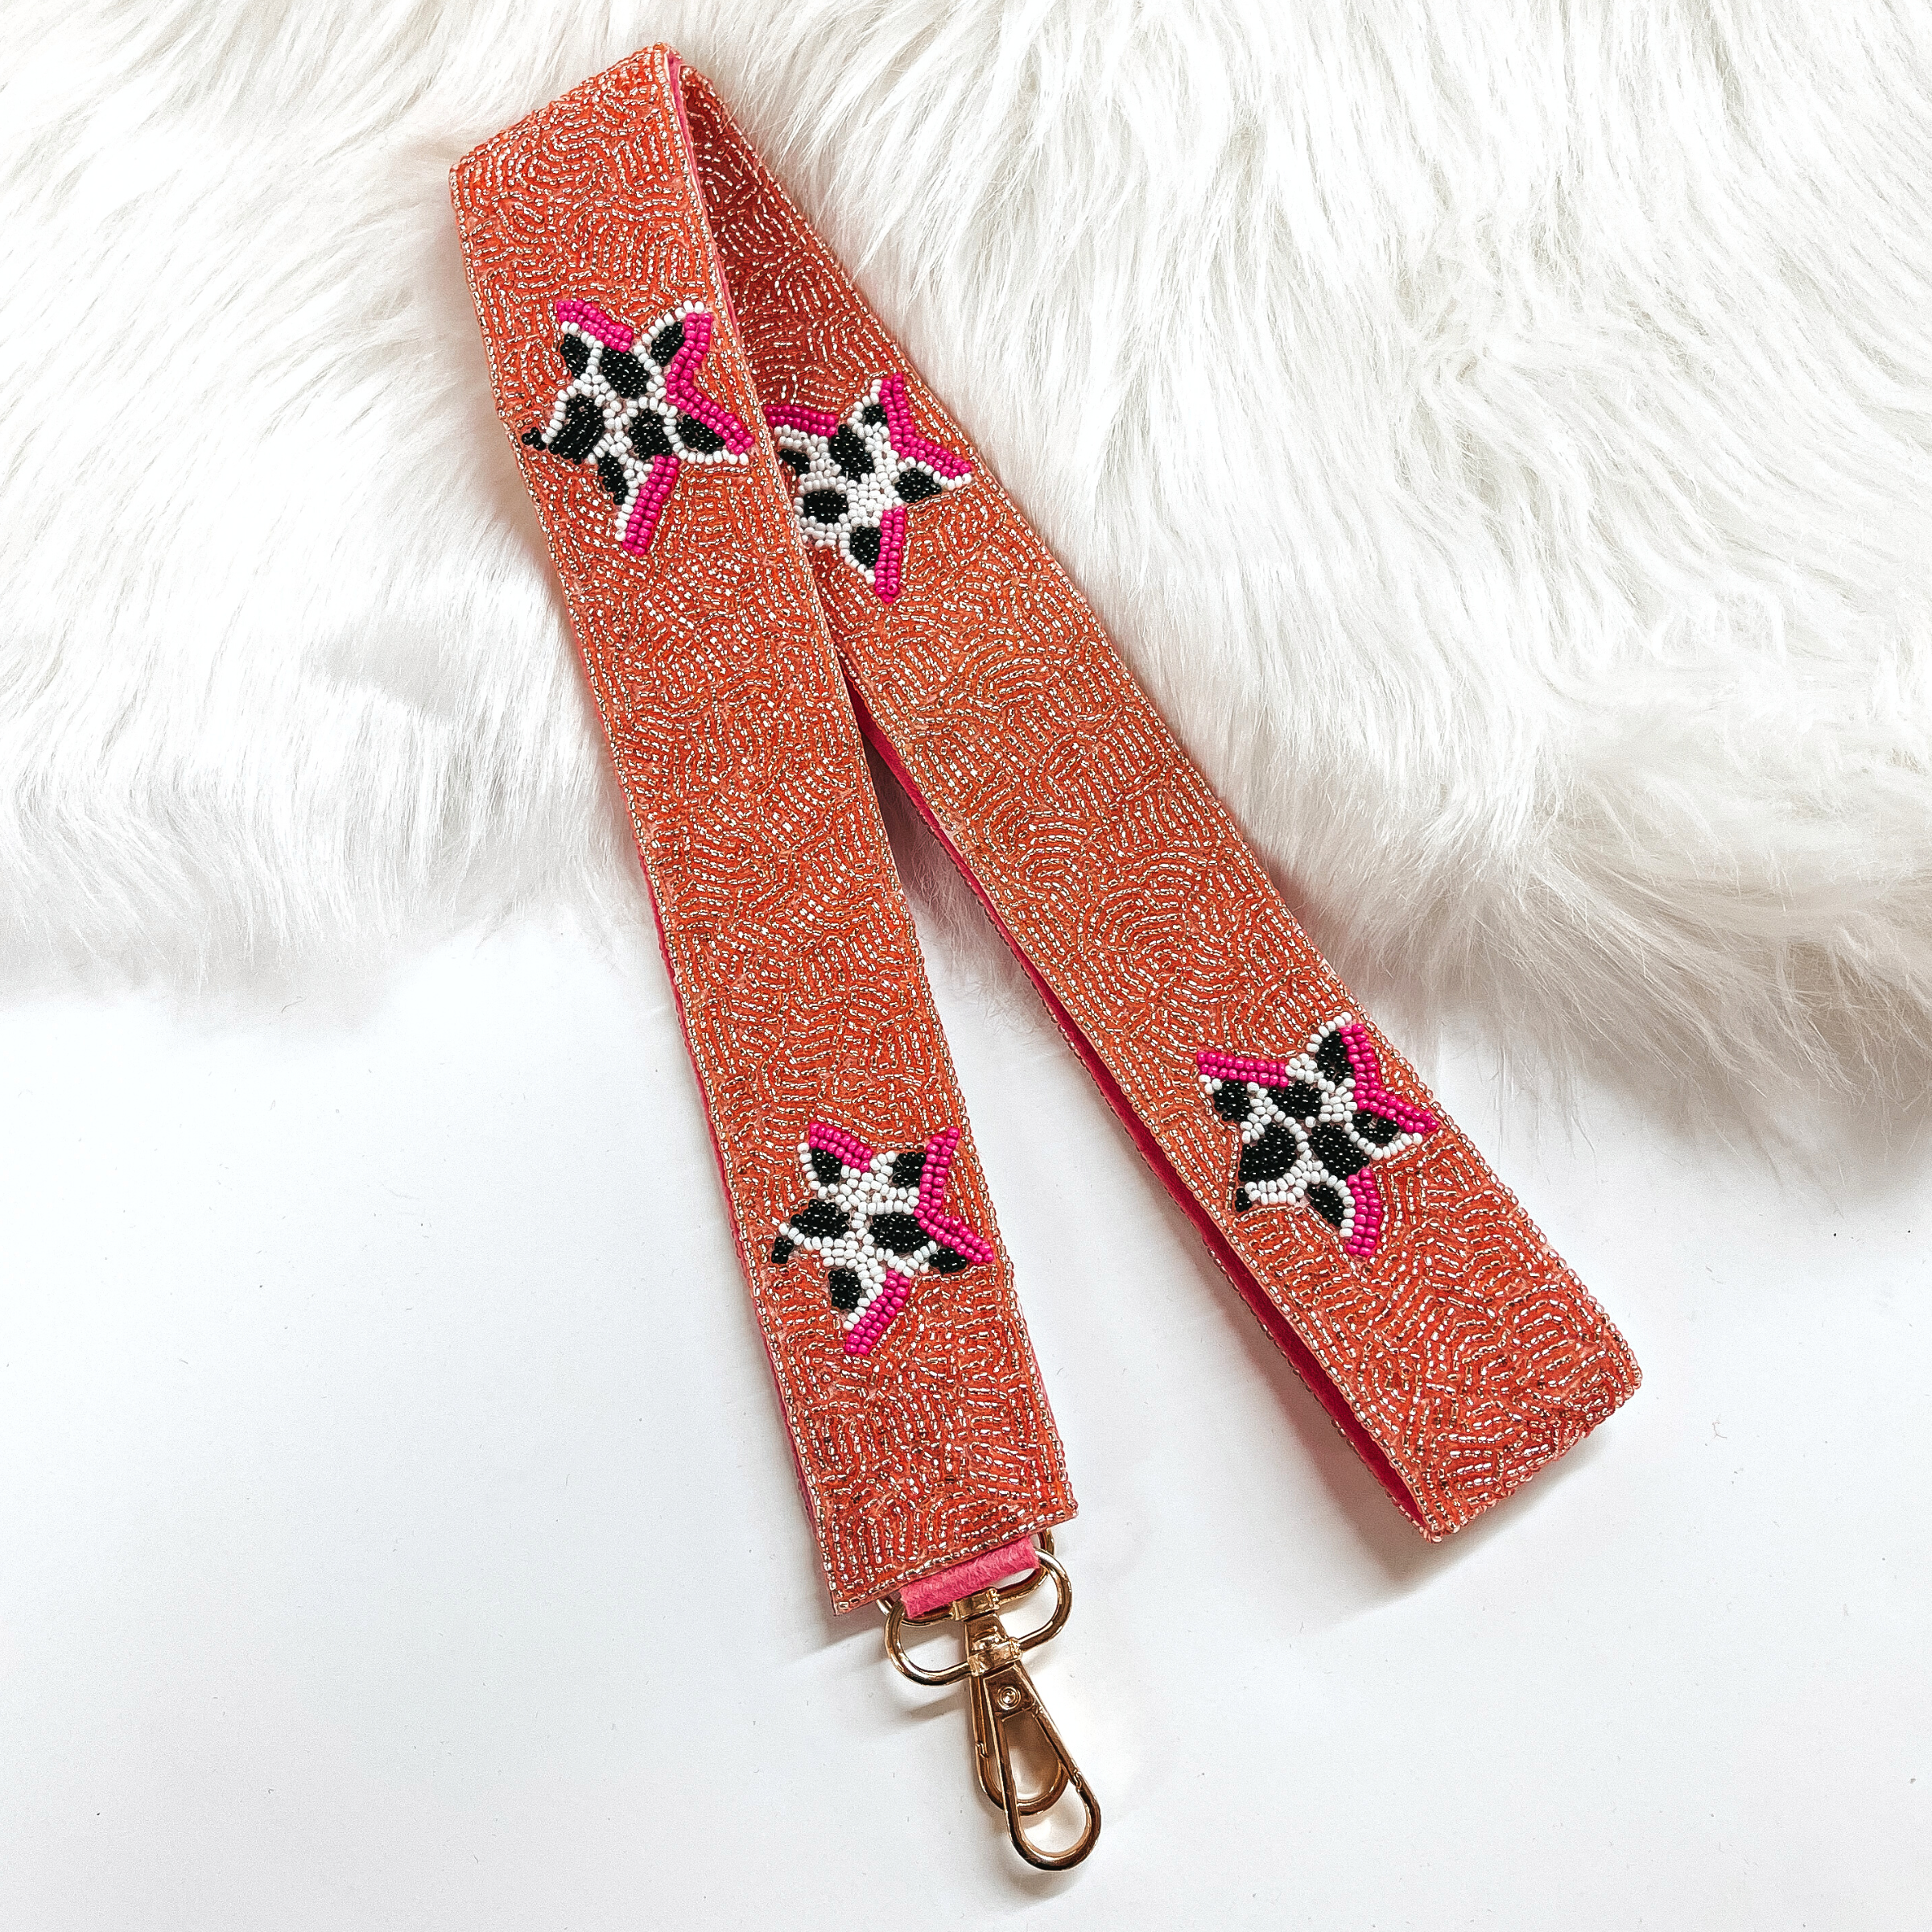 This is a coral pink beaded purse strap with cow print black and white beaded stars all along. This purse strap is laying on a white background and on white fur.